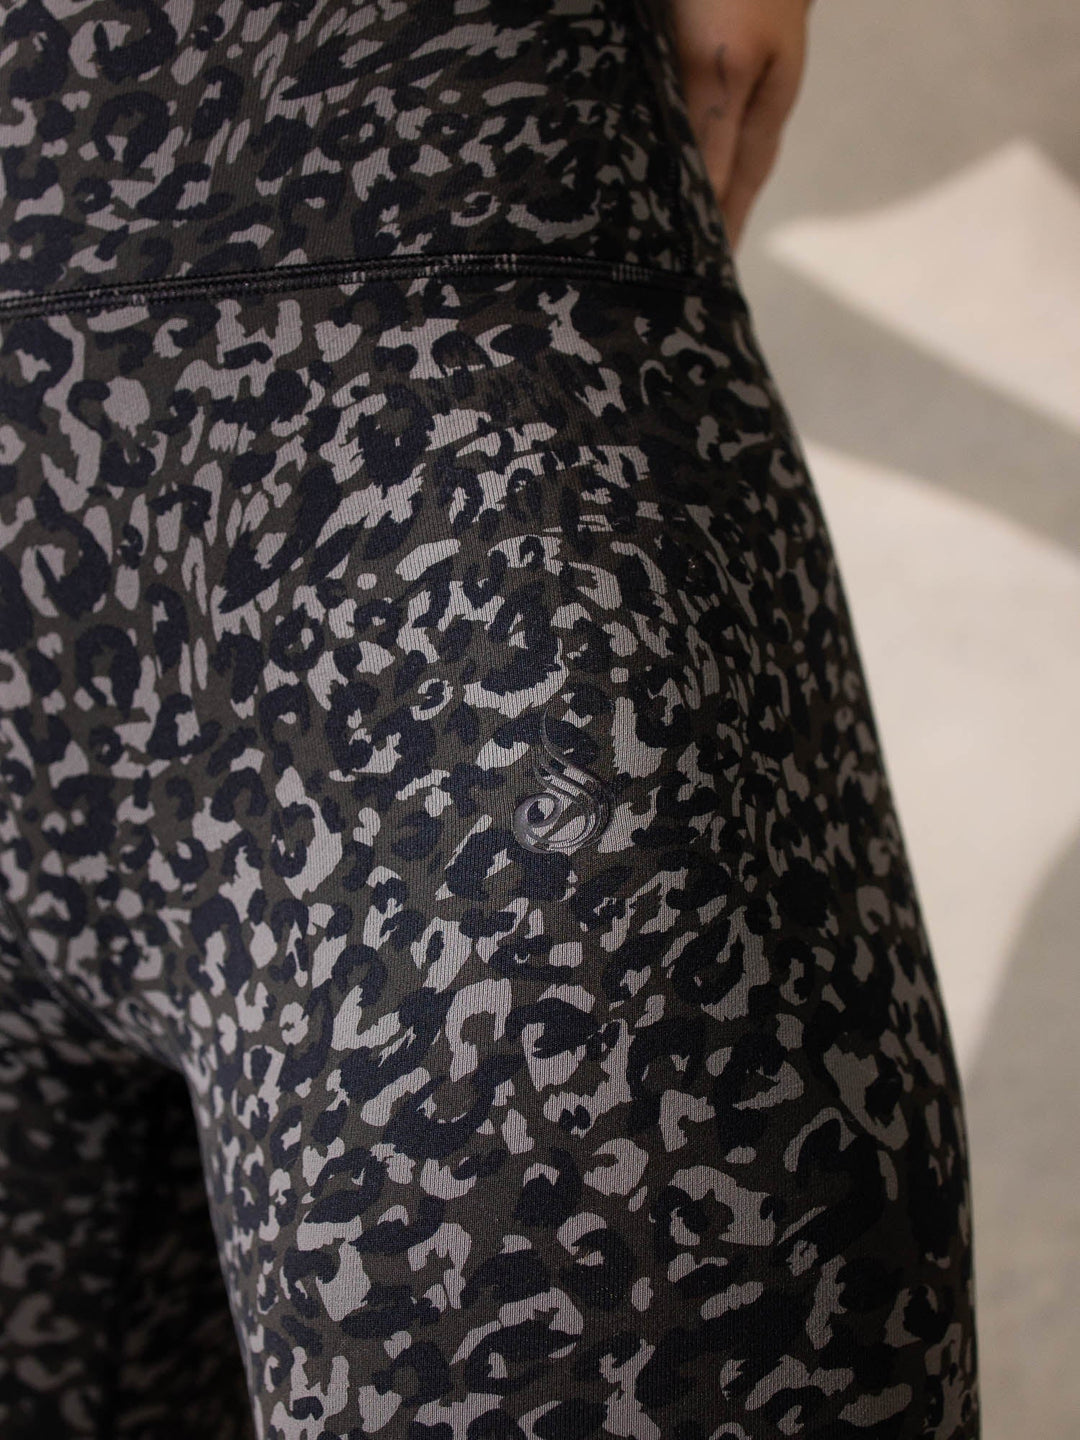 Details more than 264 black and white leggings